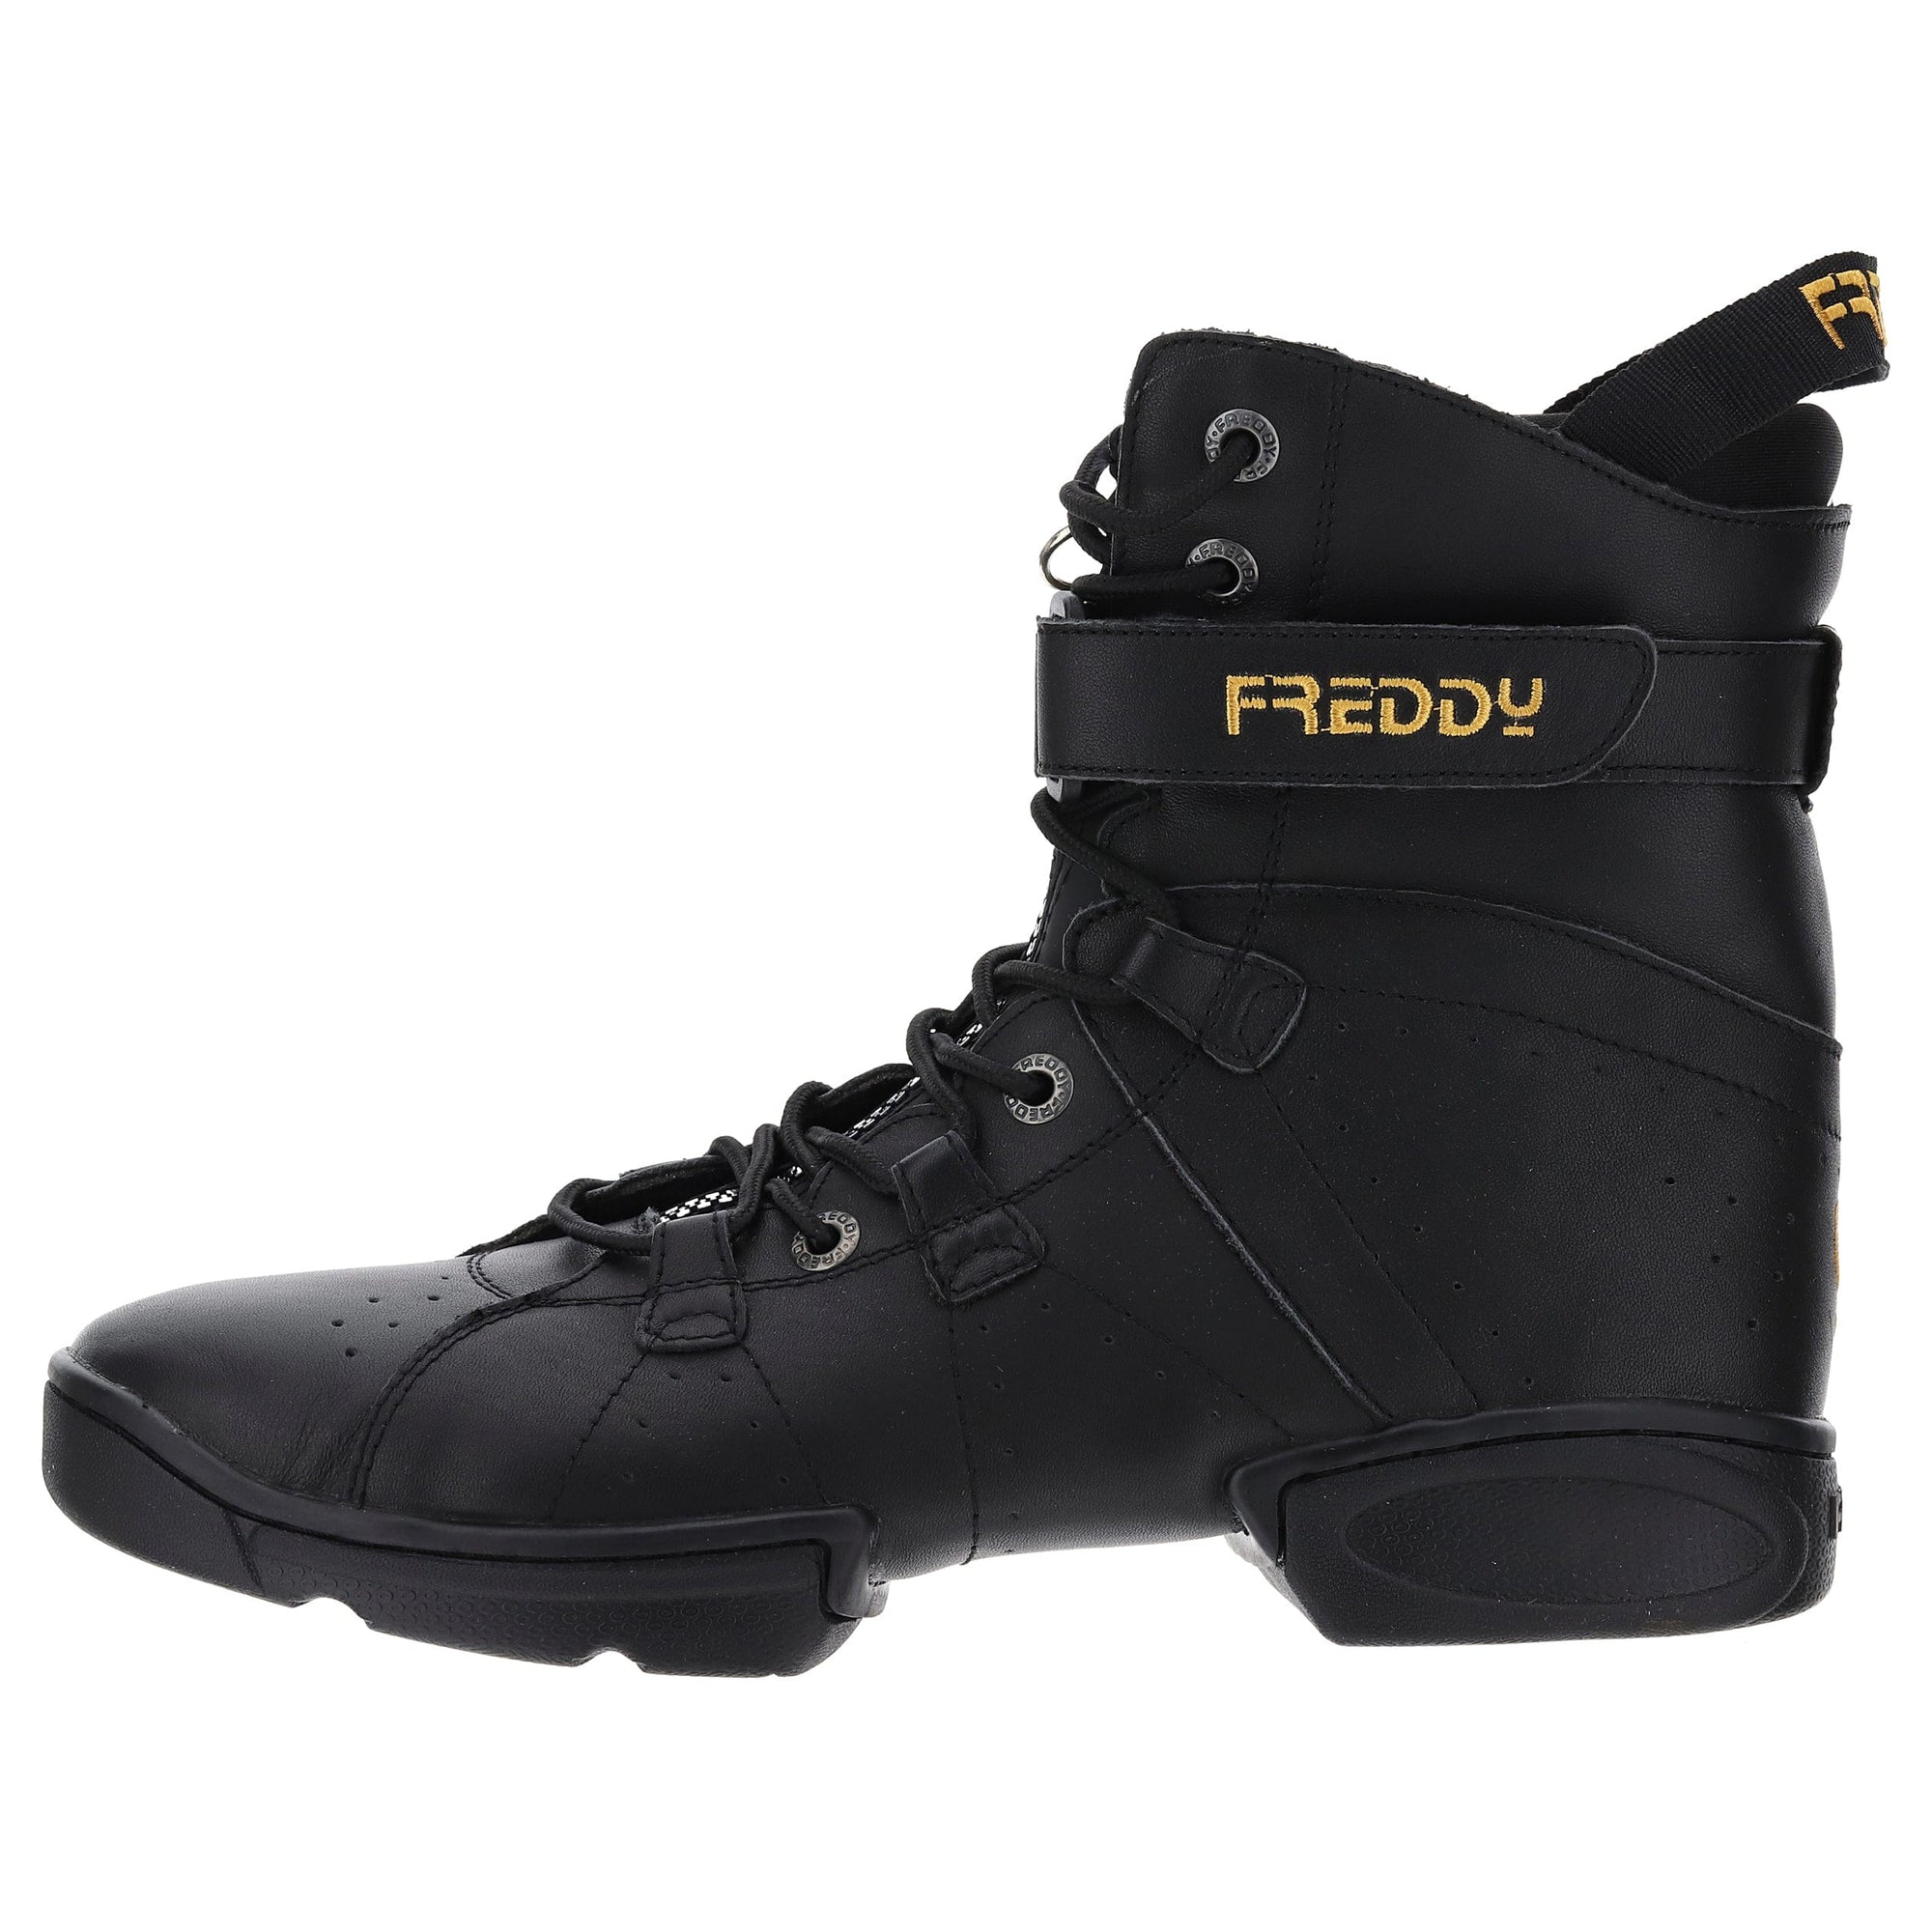 Dance Style Boots - Black 2